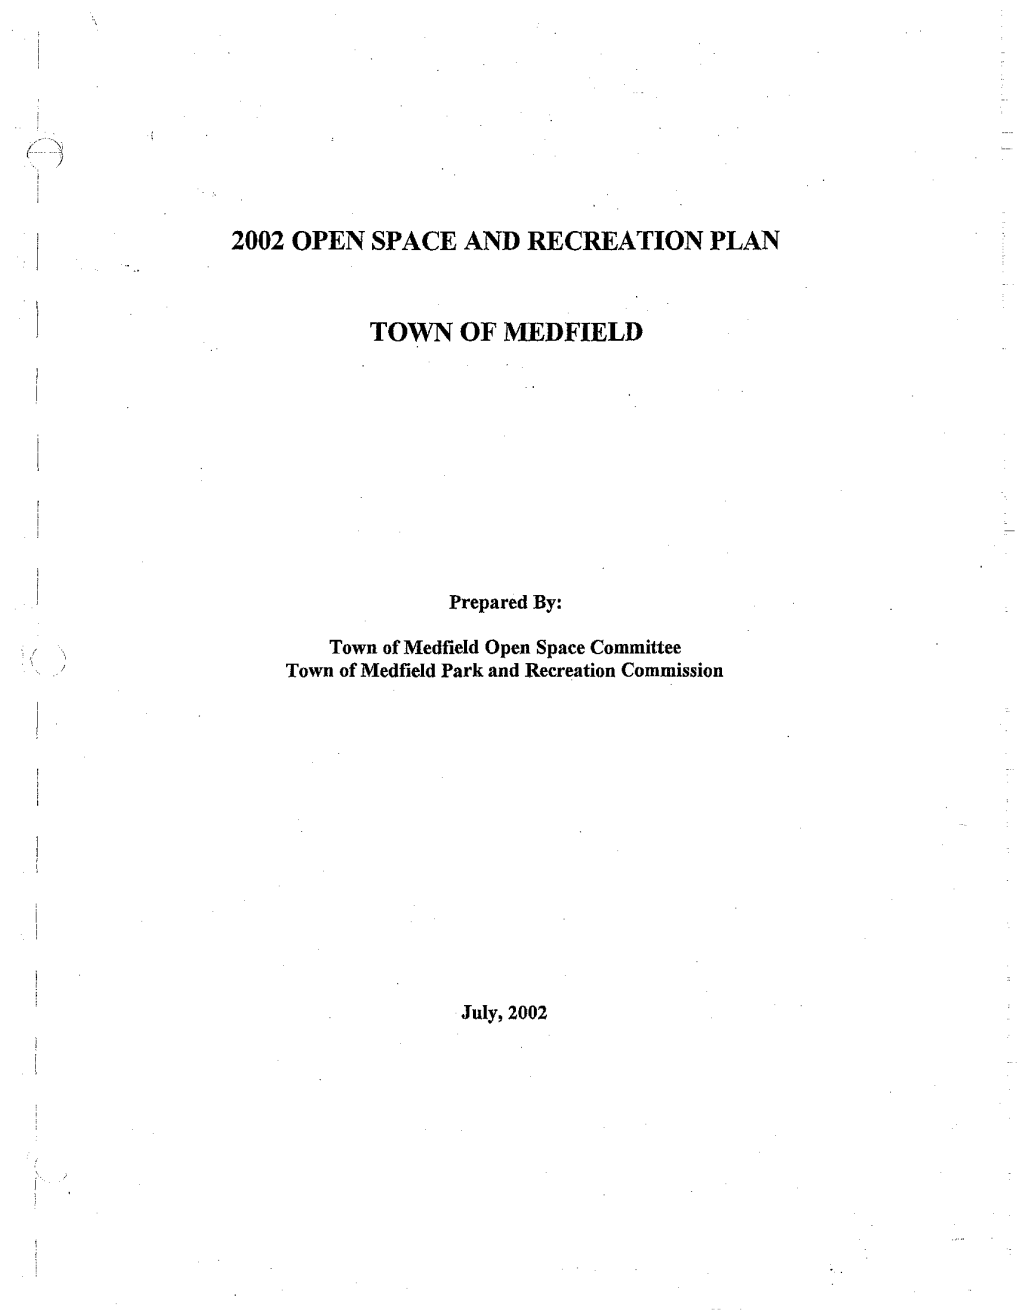 Open Space and Recreation Plan 2002